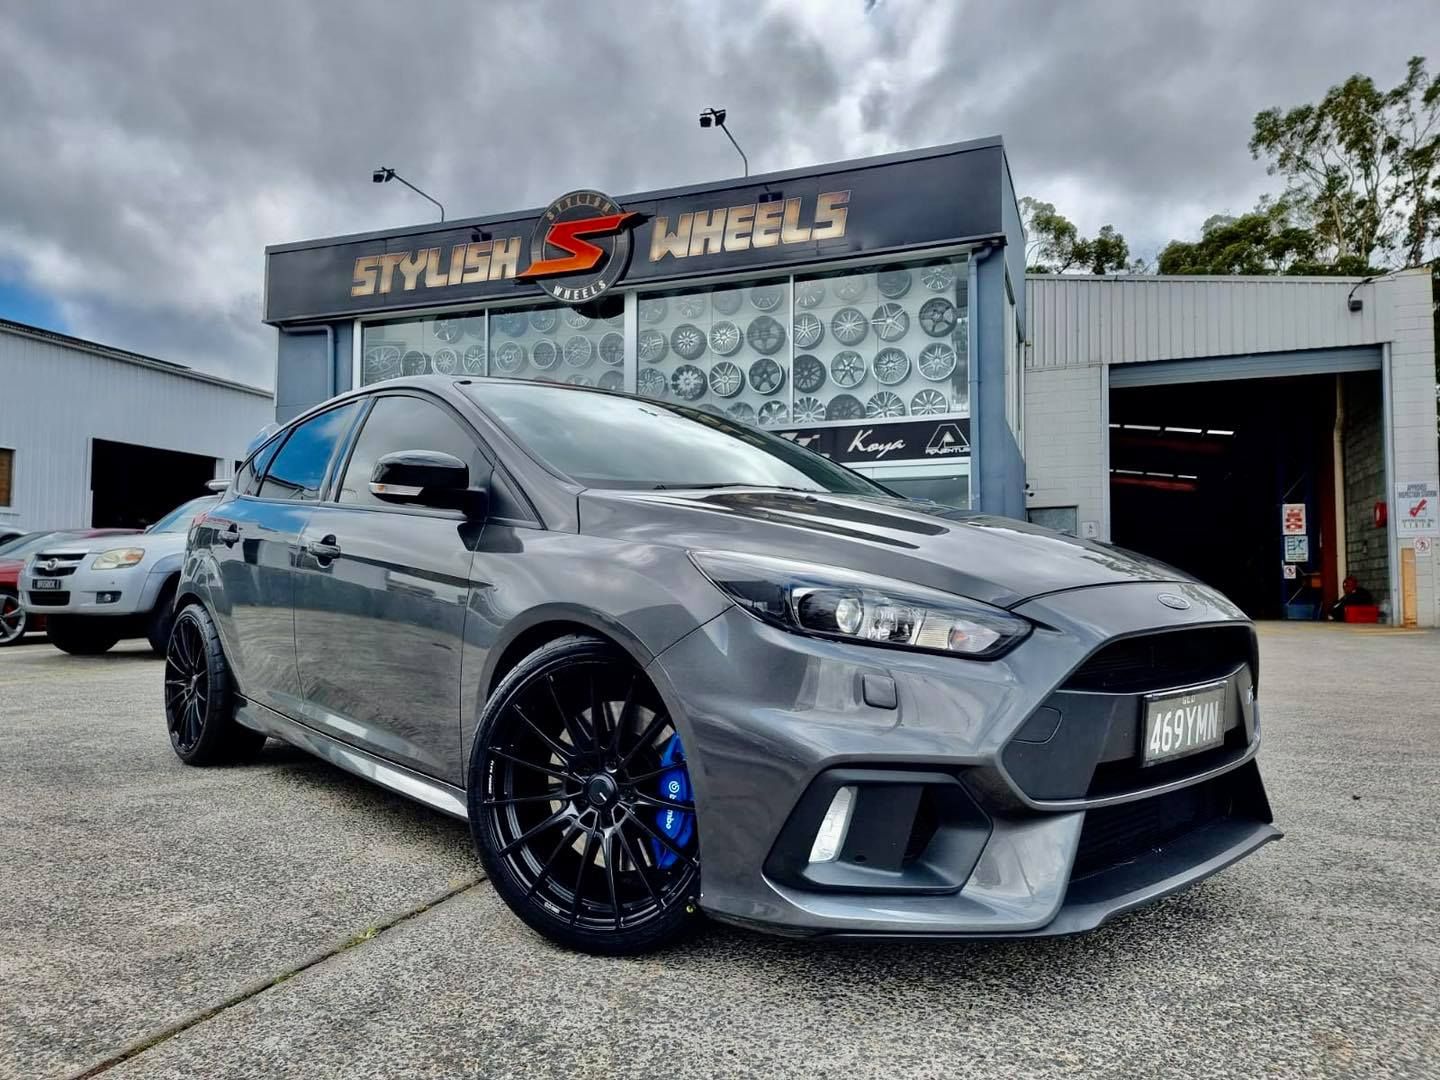 Ford Focus RS Mk3 with 19×8.5-inch Enkei FC01